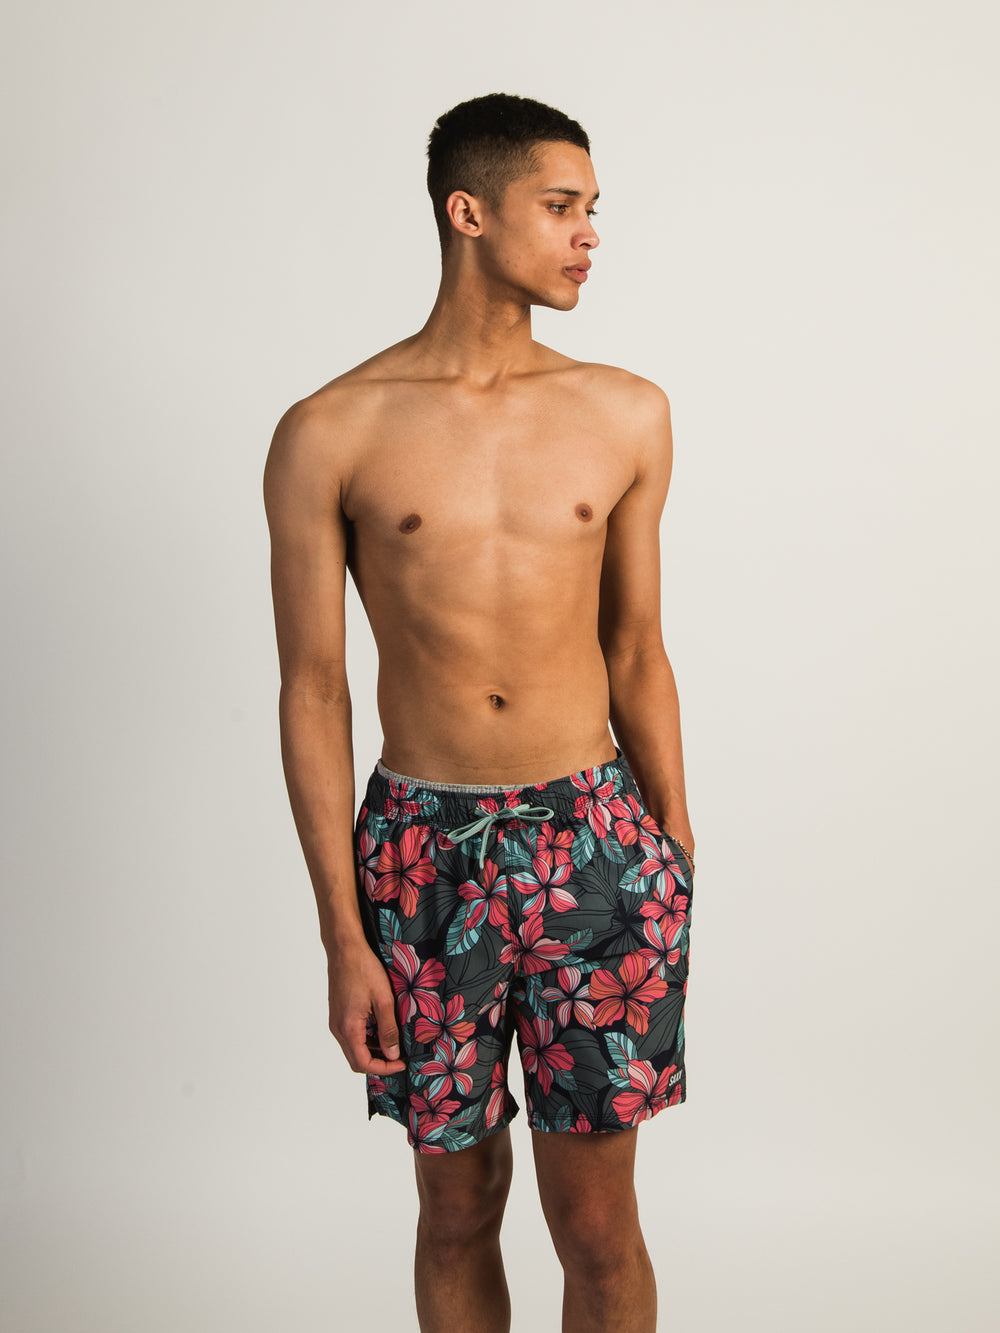 SAXX OH BUOY 2IN1 7" VOLLEY SHORTS - FLORAL